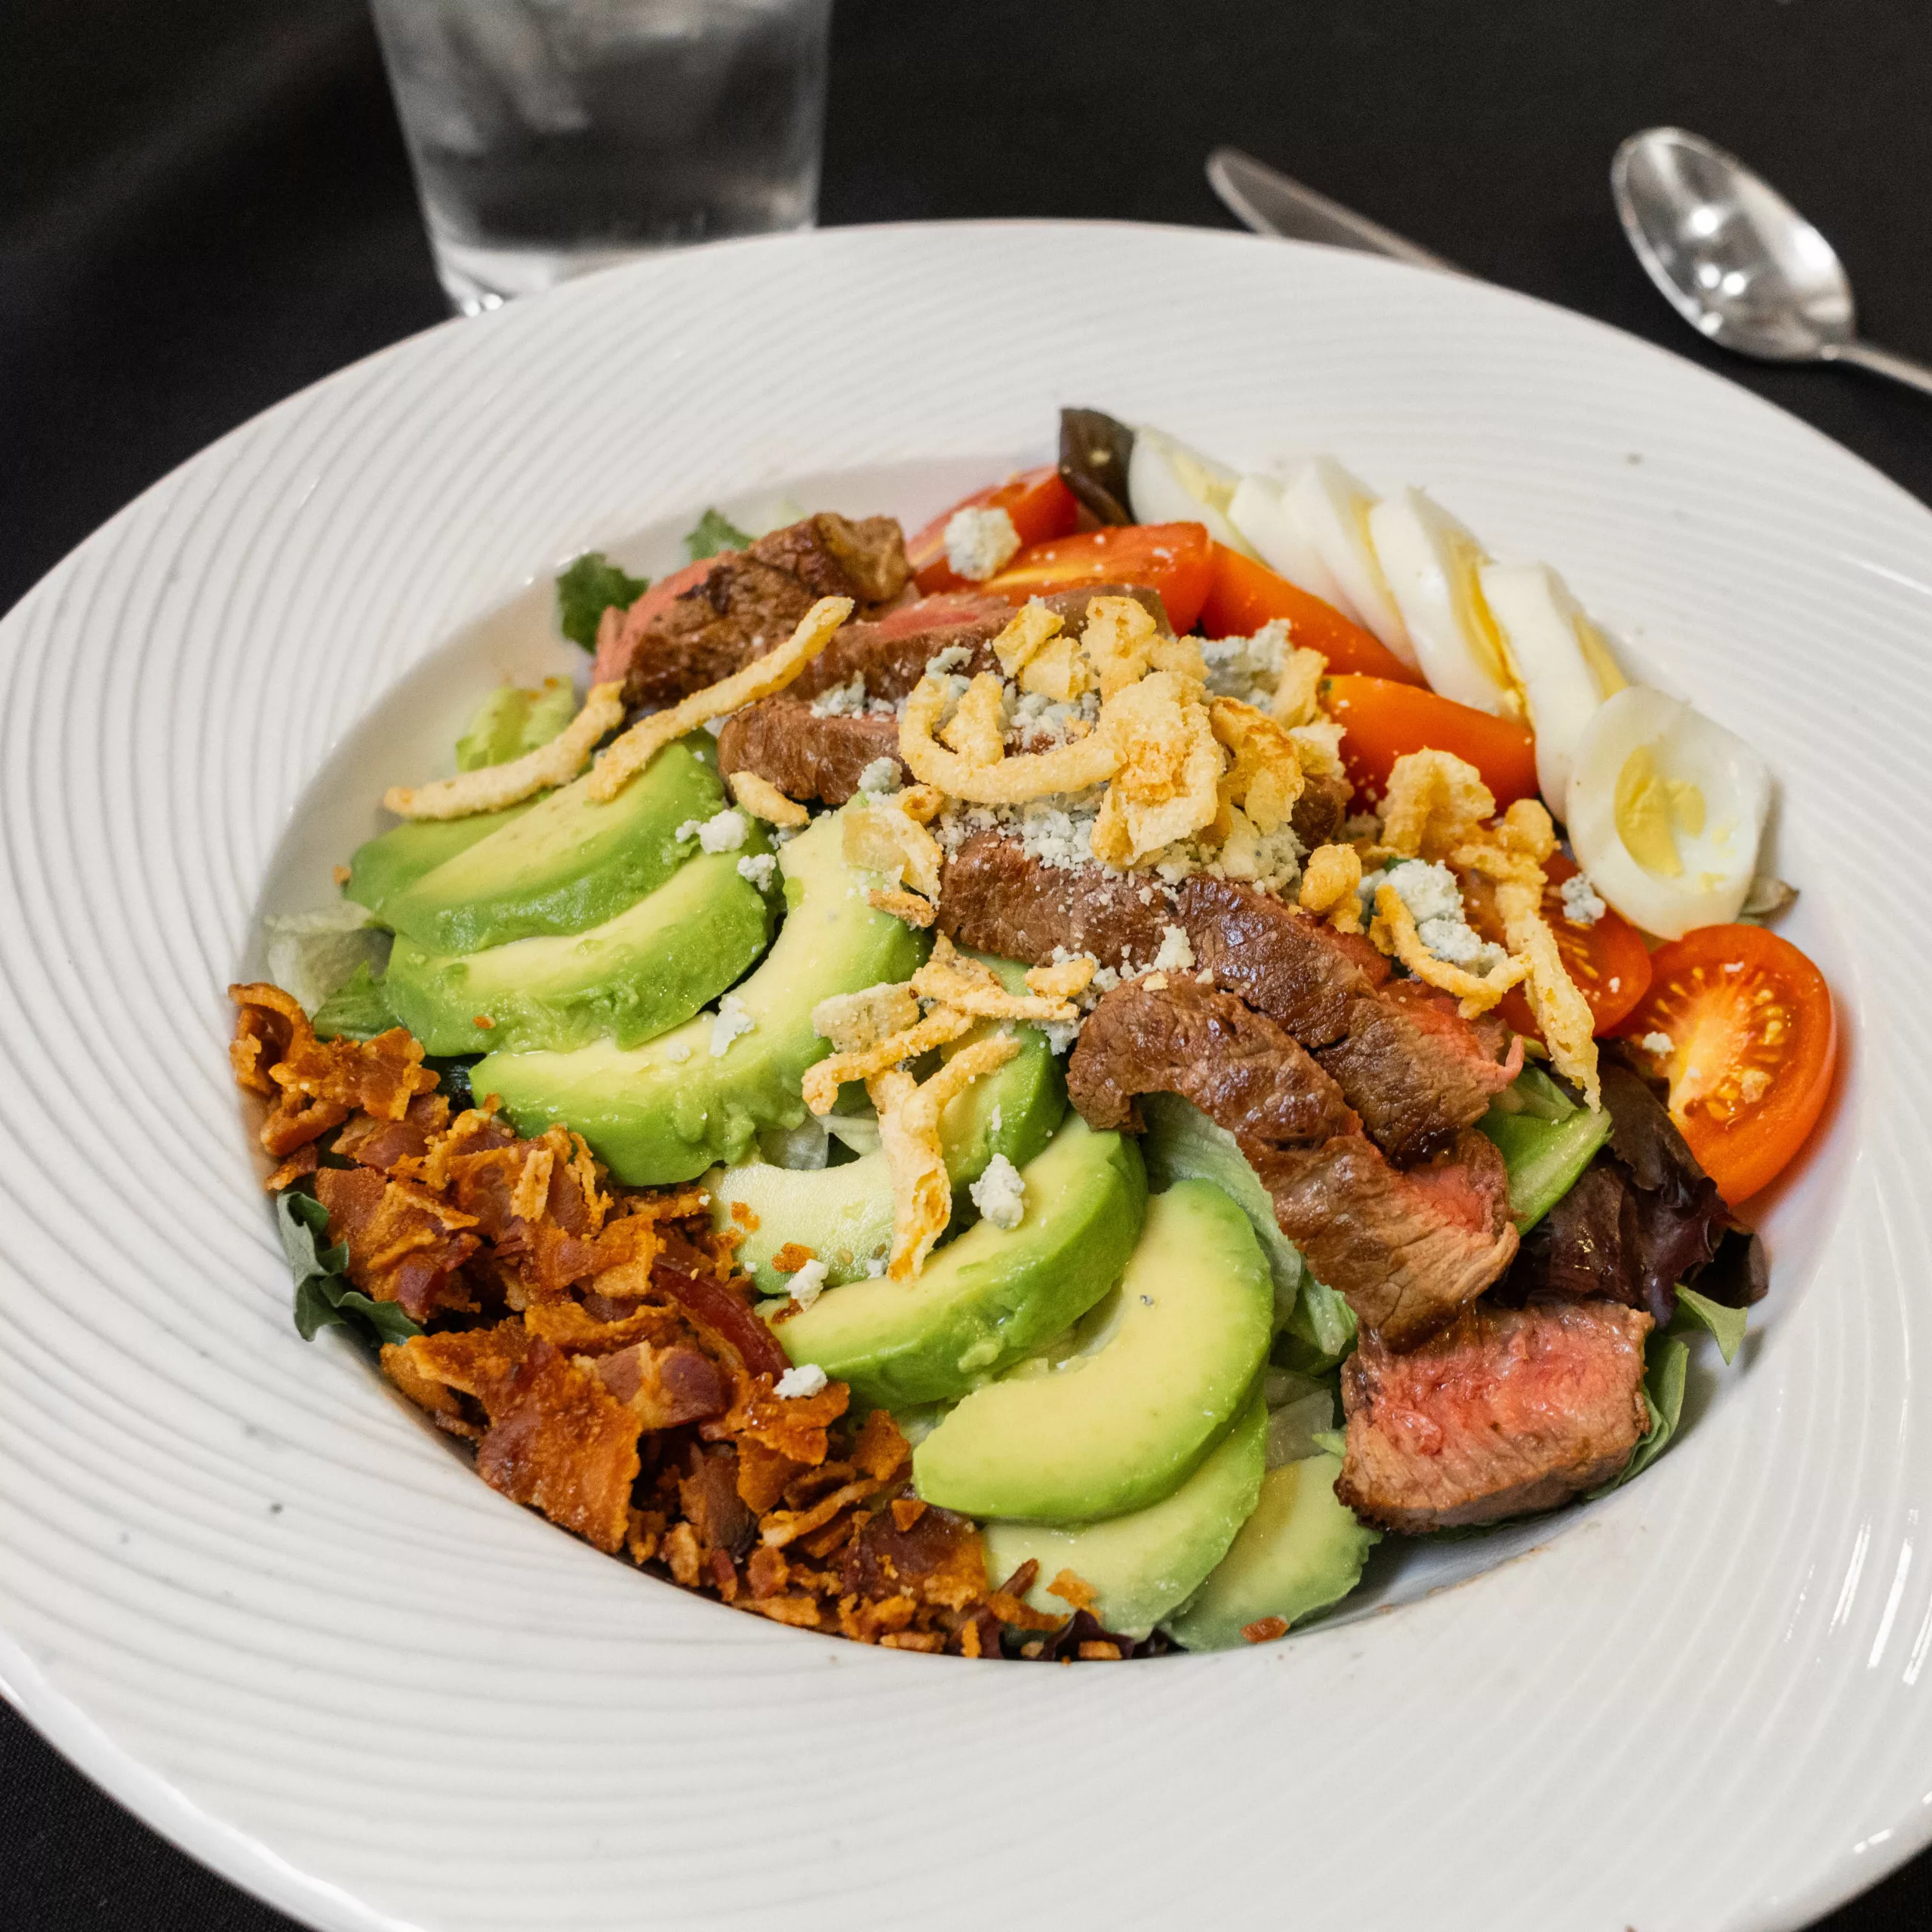 Dinner at the Terrace - seared steak salad with avocado, tomatoes, bacon, crispy onions 